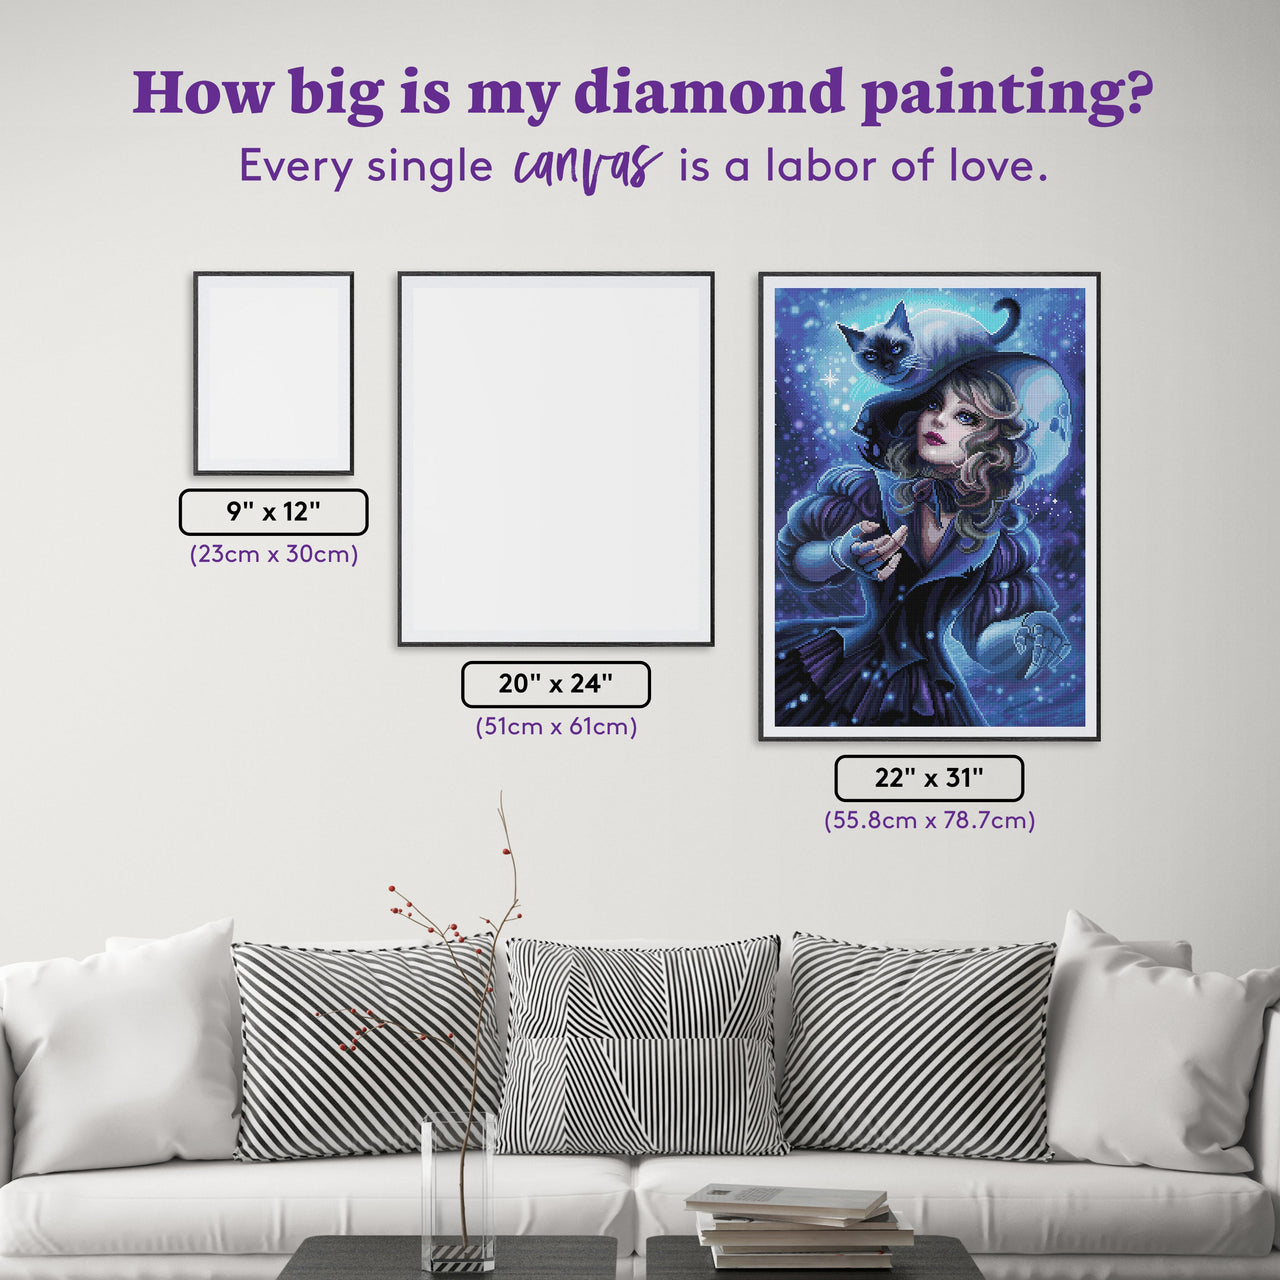 Diamond Painting First Star 22" x 31" (55.8cm x 78.7cm) / Round with 59 Colors including 2 ABs and 3 Fairy Dust Diamonds / 55,919